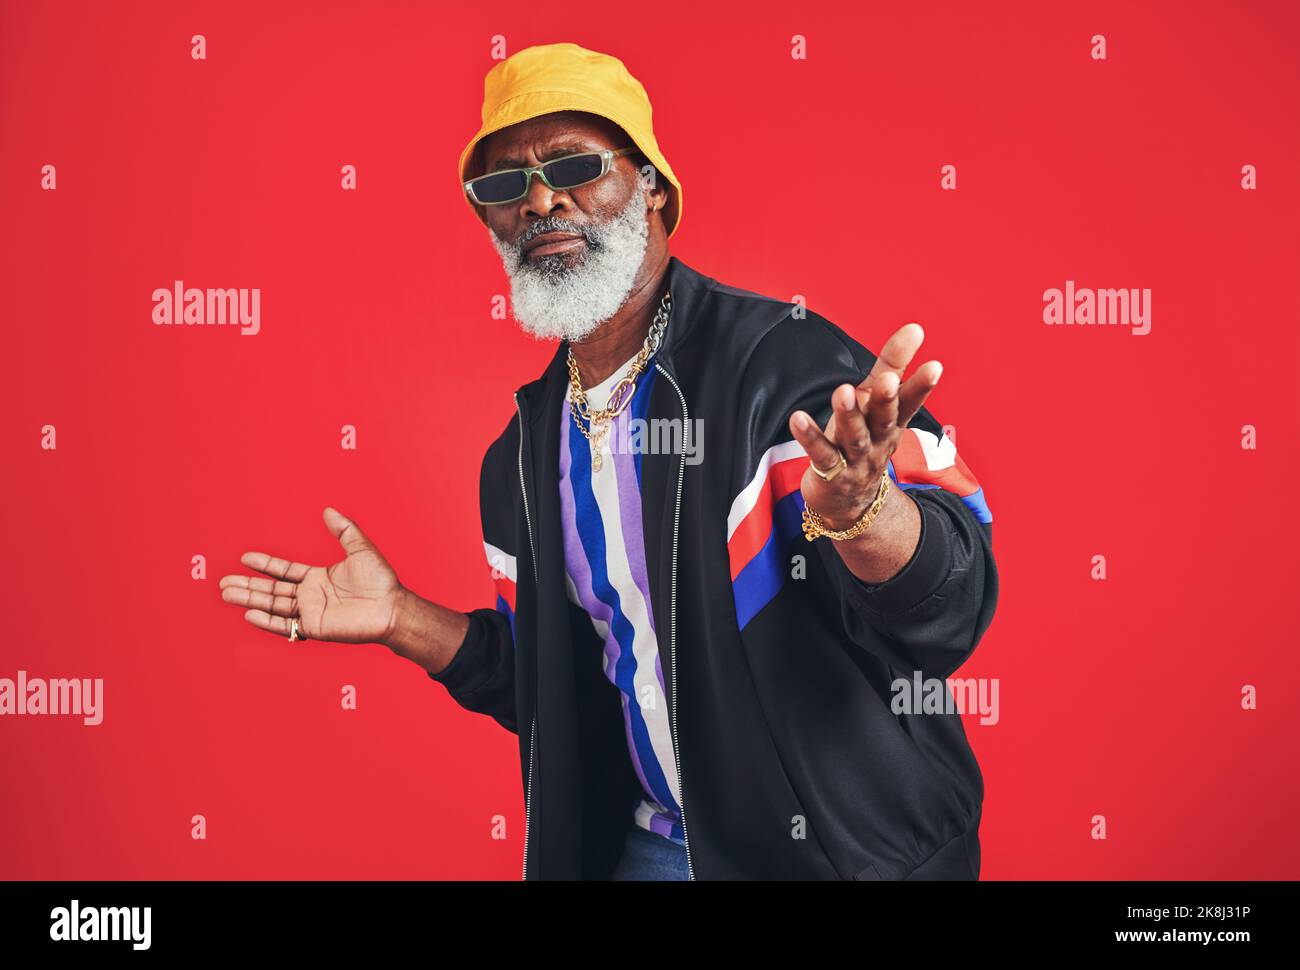 Dress however you want. Studio shot of a senior man wearing retro attire while posing against a red background. Stock Photo